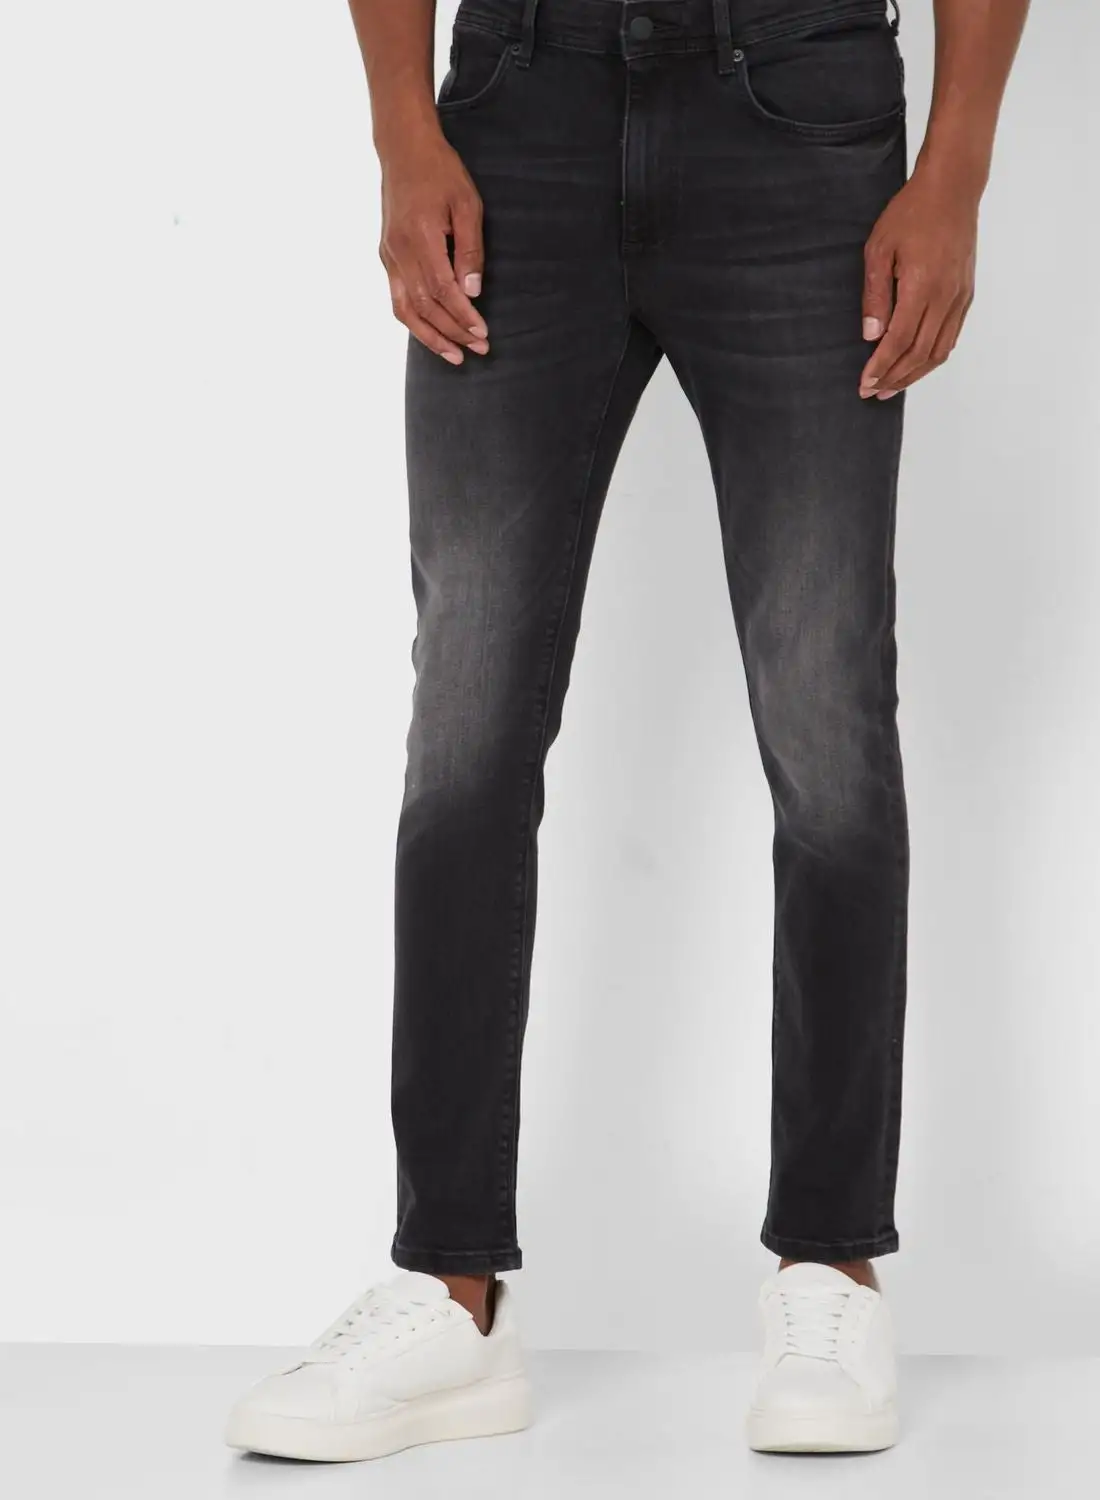 RIVER ISLAND Rinse Skinny Fit Jeans